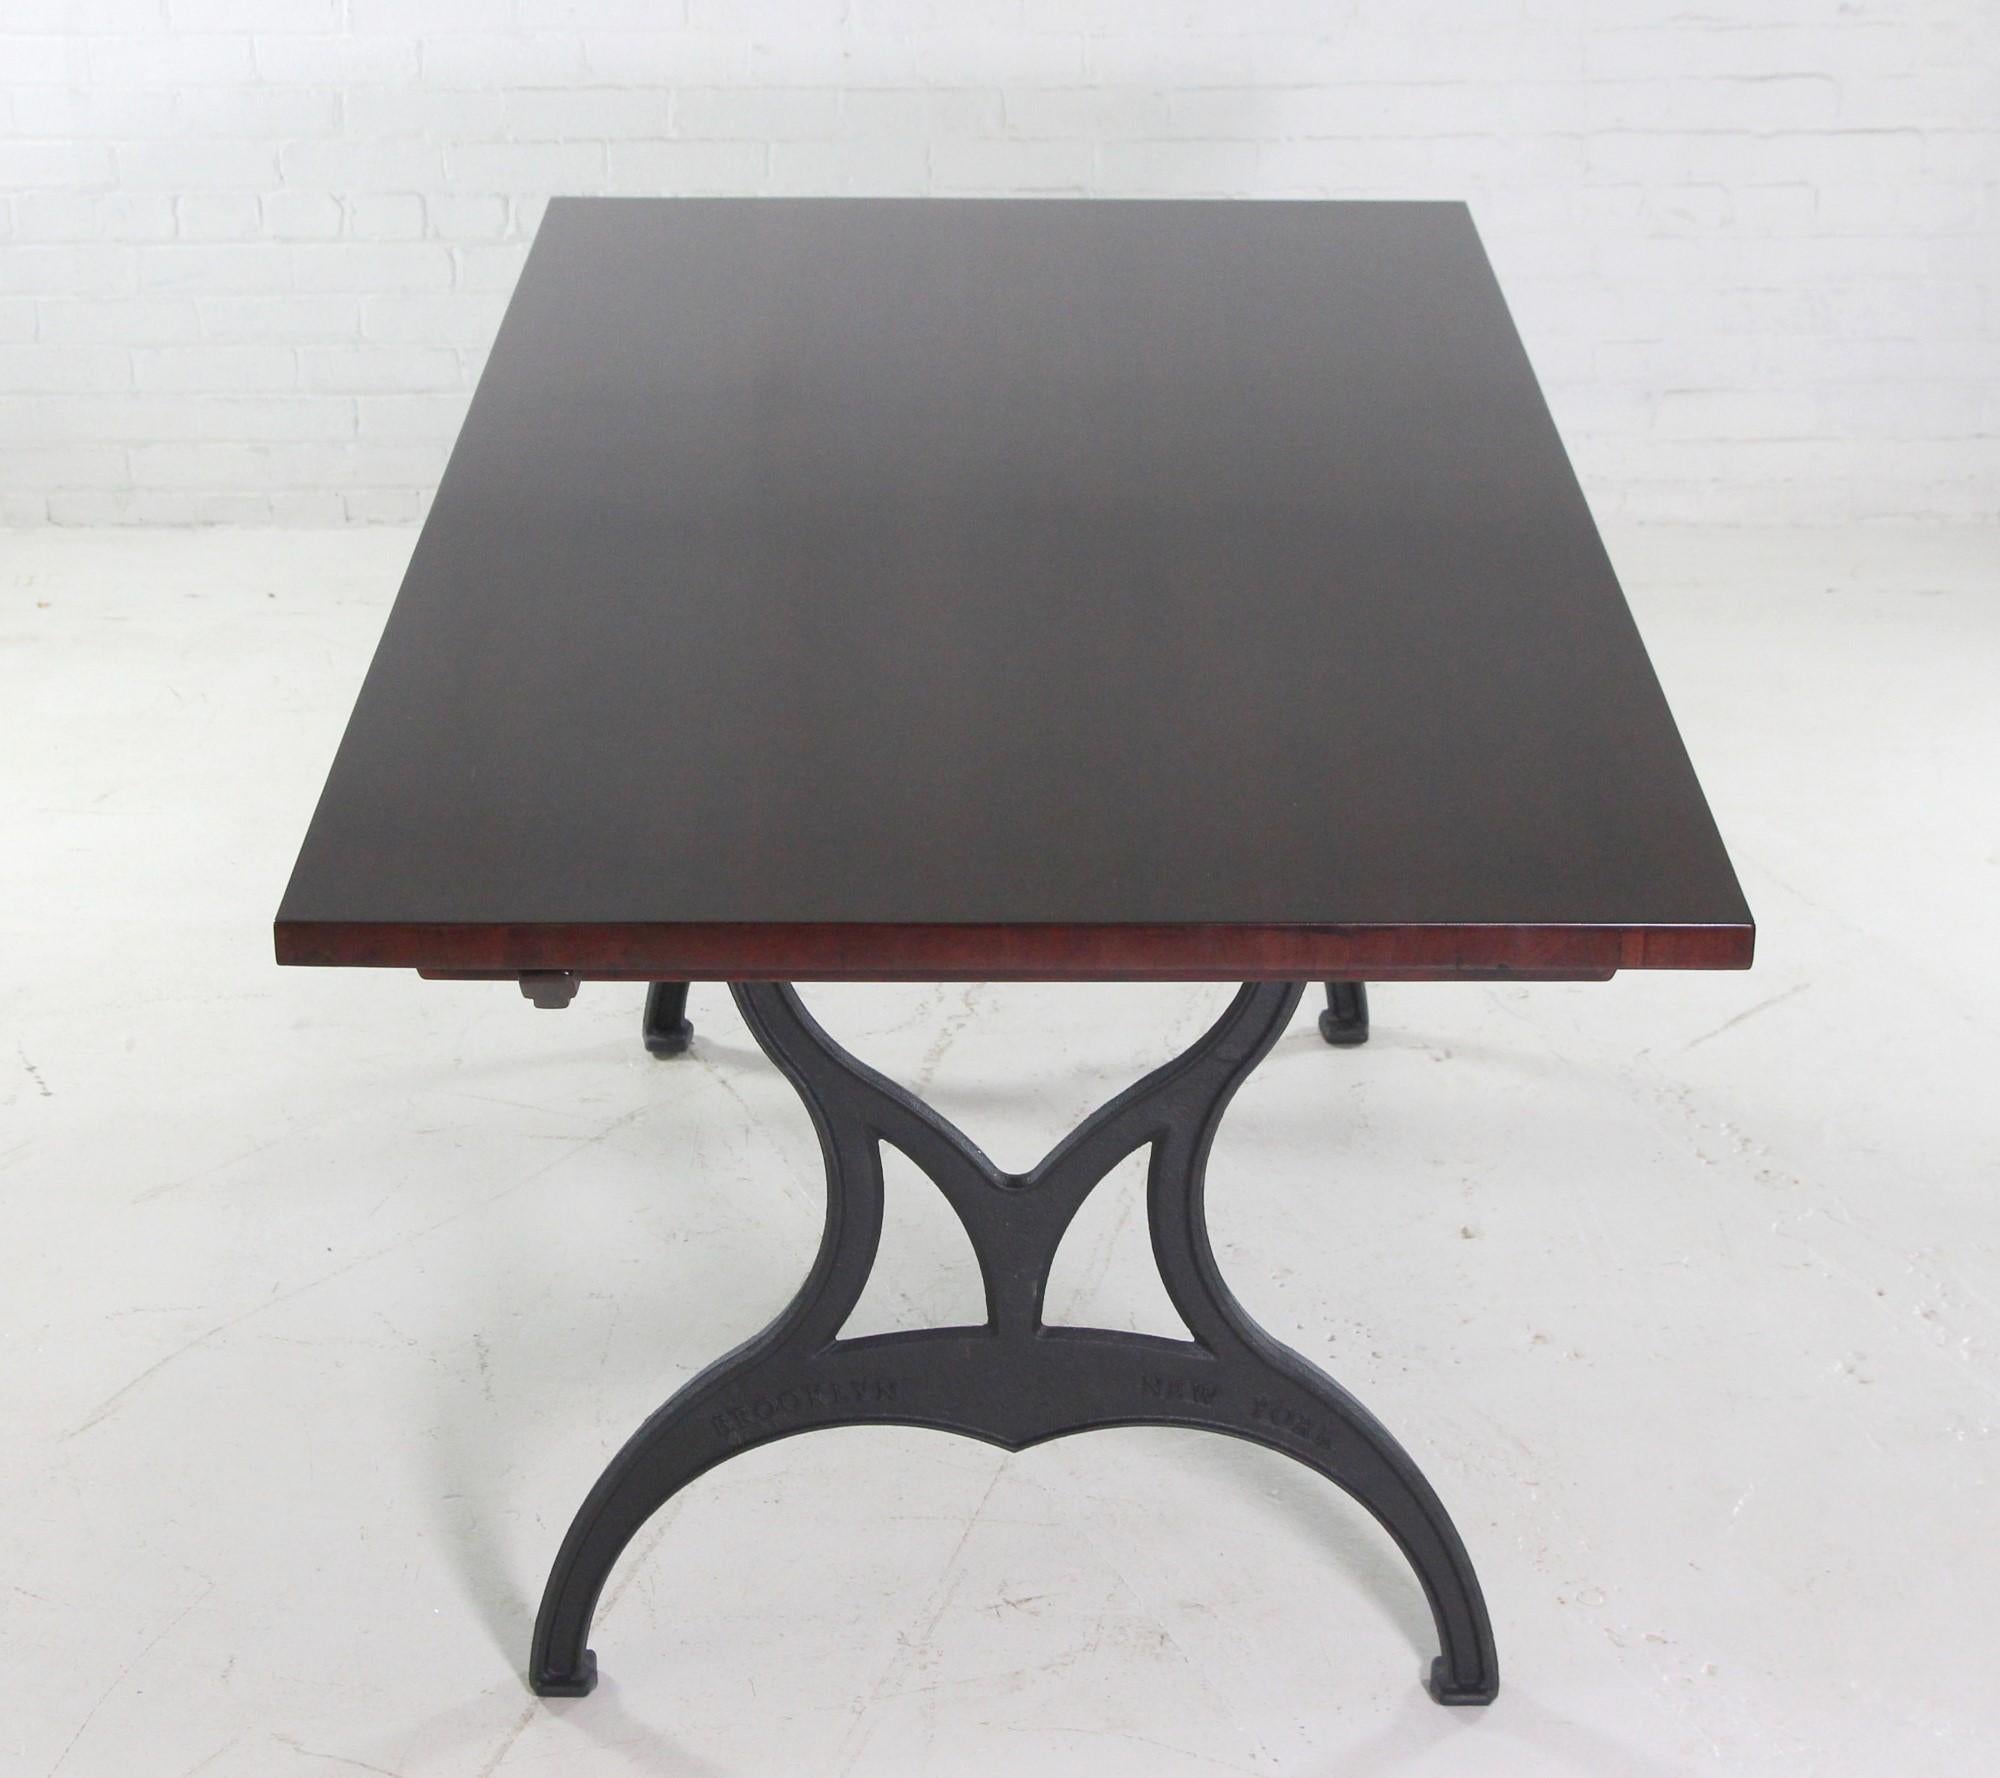 Red Mahogany Apitong Table w Extensions Cast Iron Legs Brooklyn, NY For Sale 3